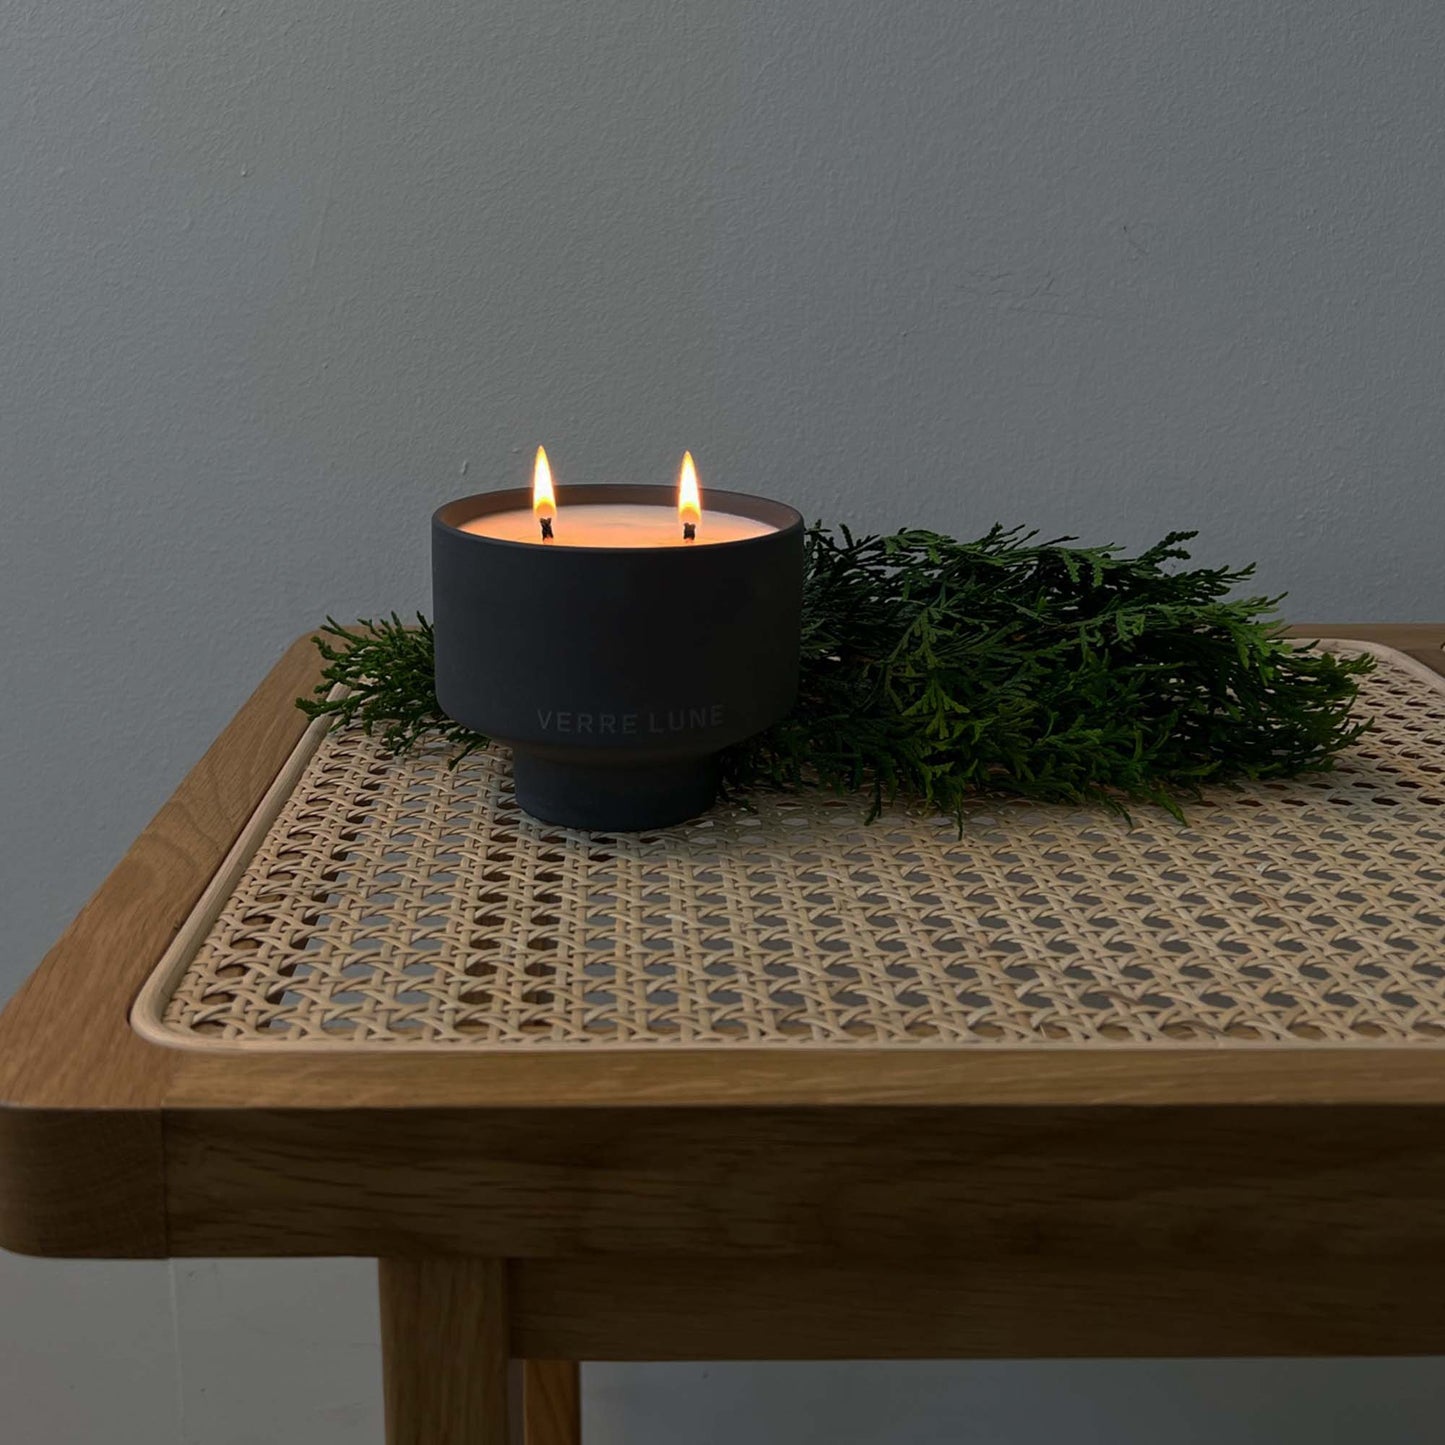 Verre Lune Candle - Off Grid